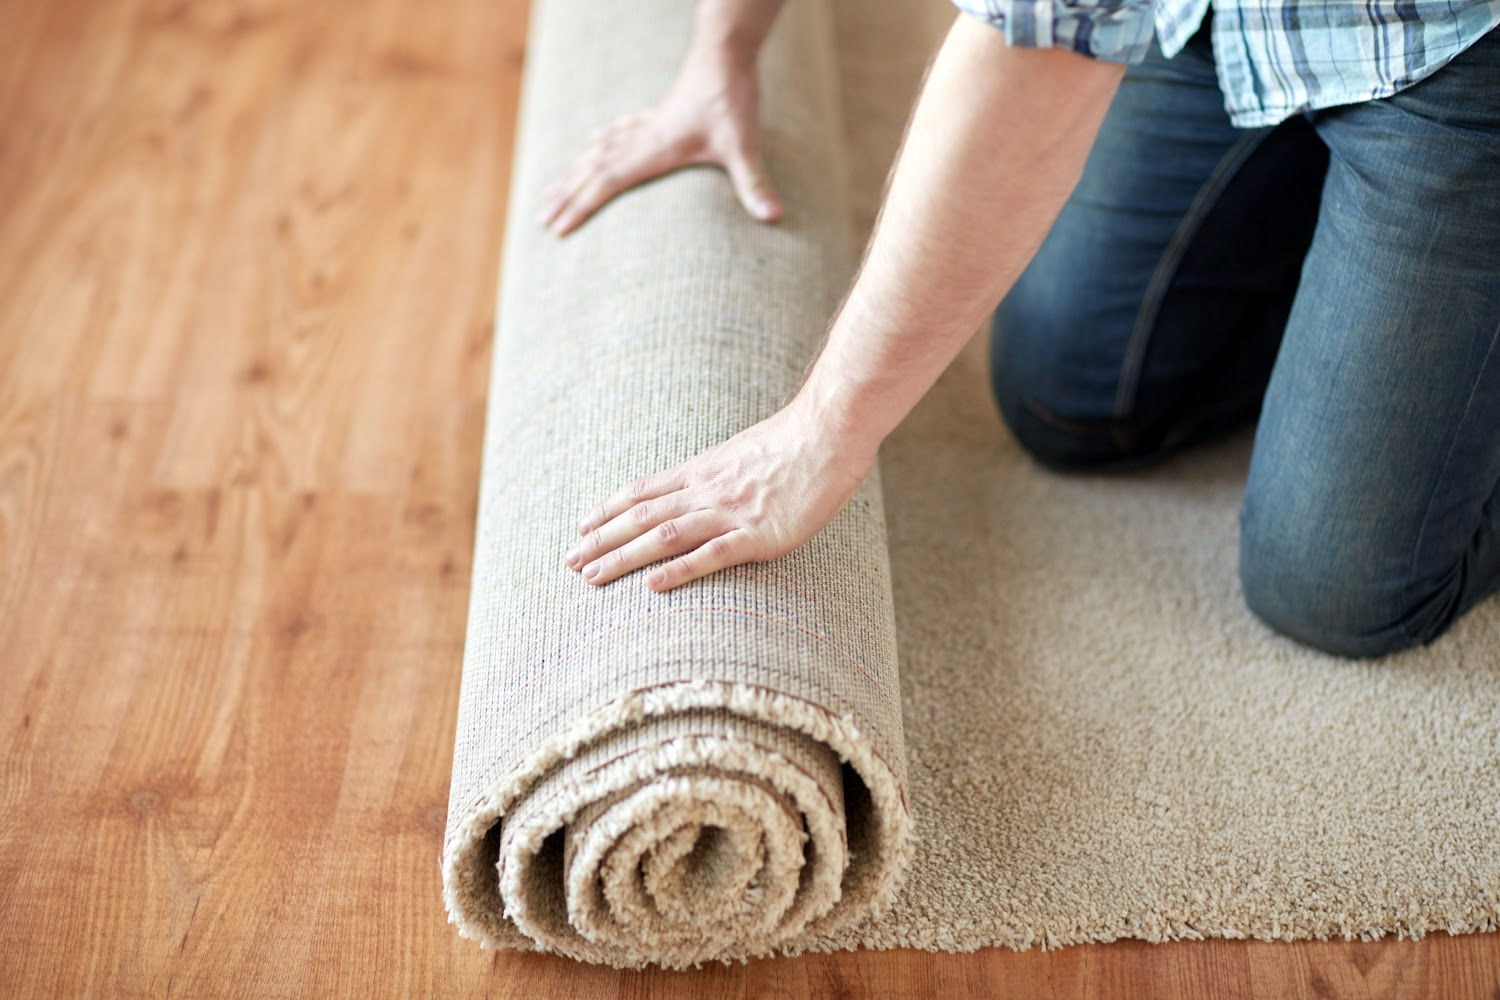 If you’re thinking of replacing an old carpet, learn about modern carpet trends